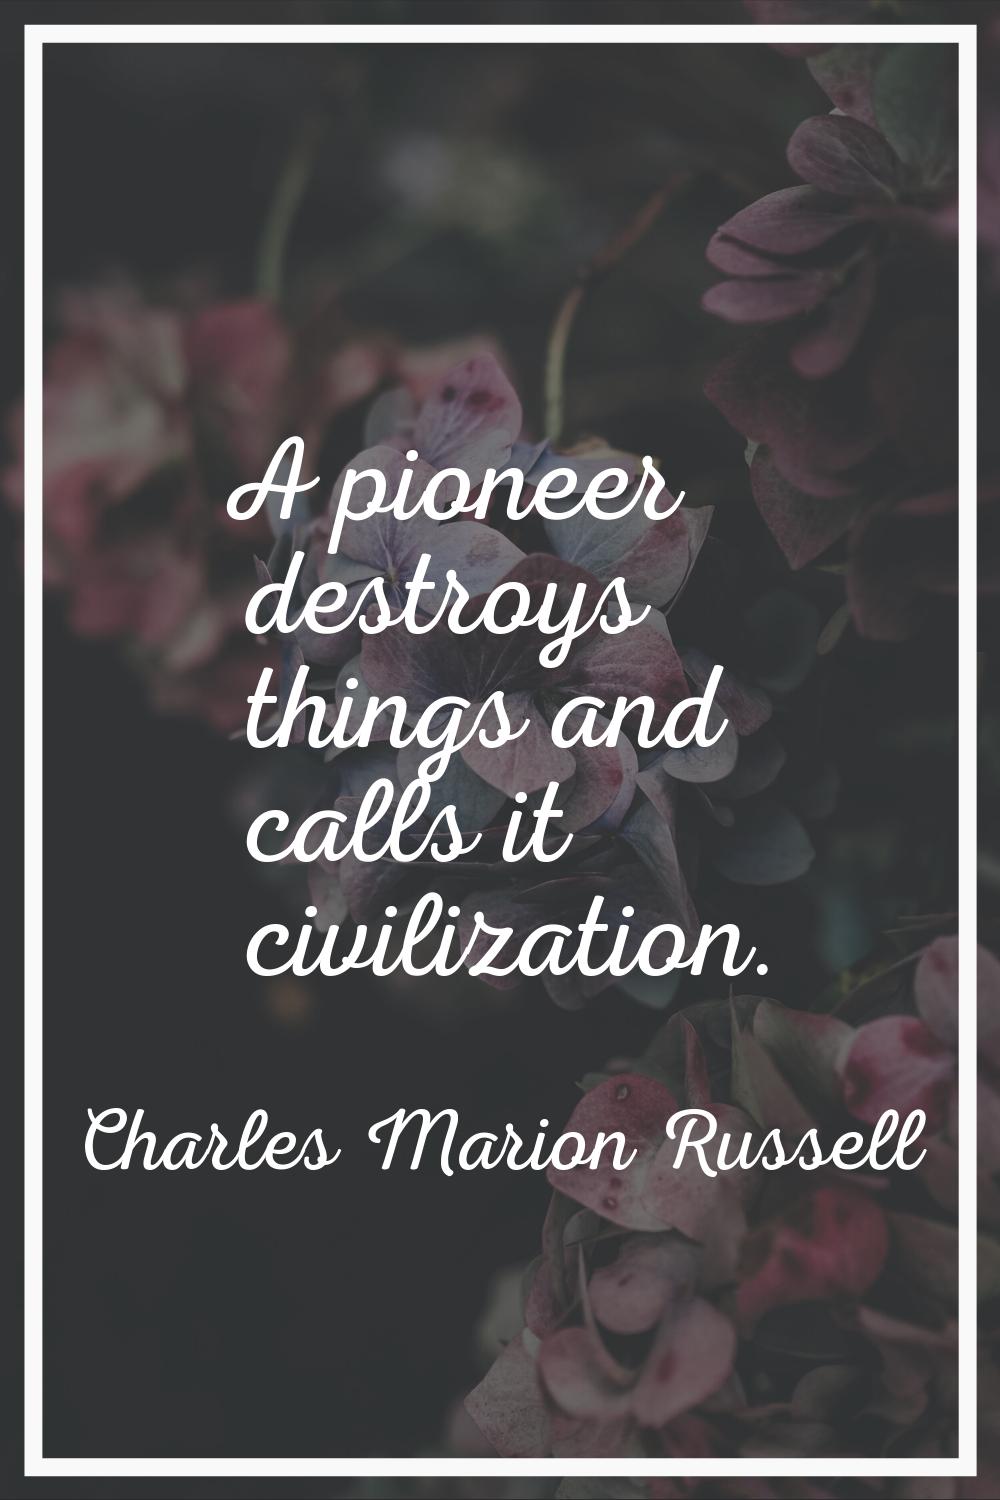 A pioneer destroys things and calls it civilization.